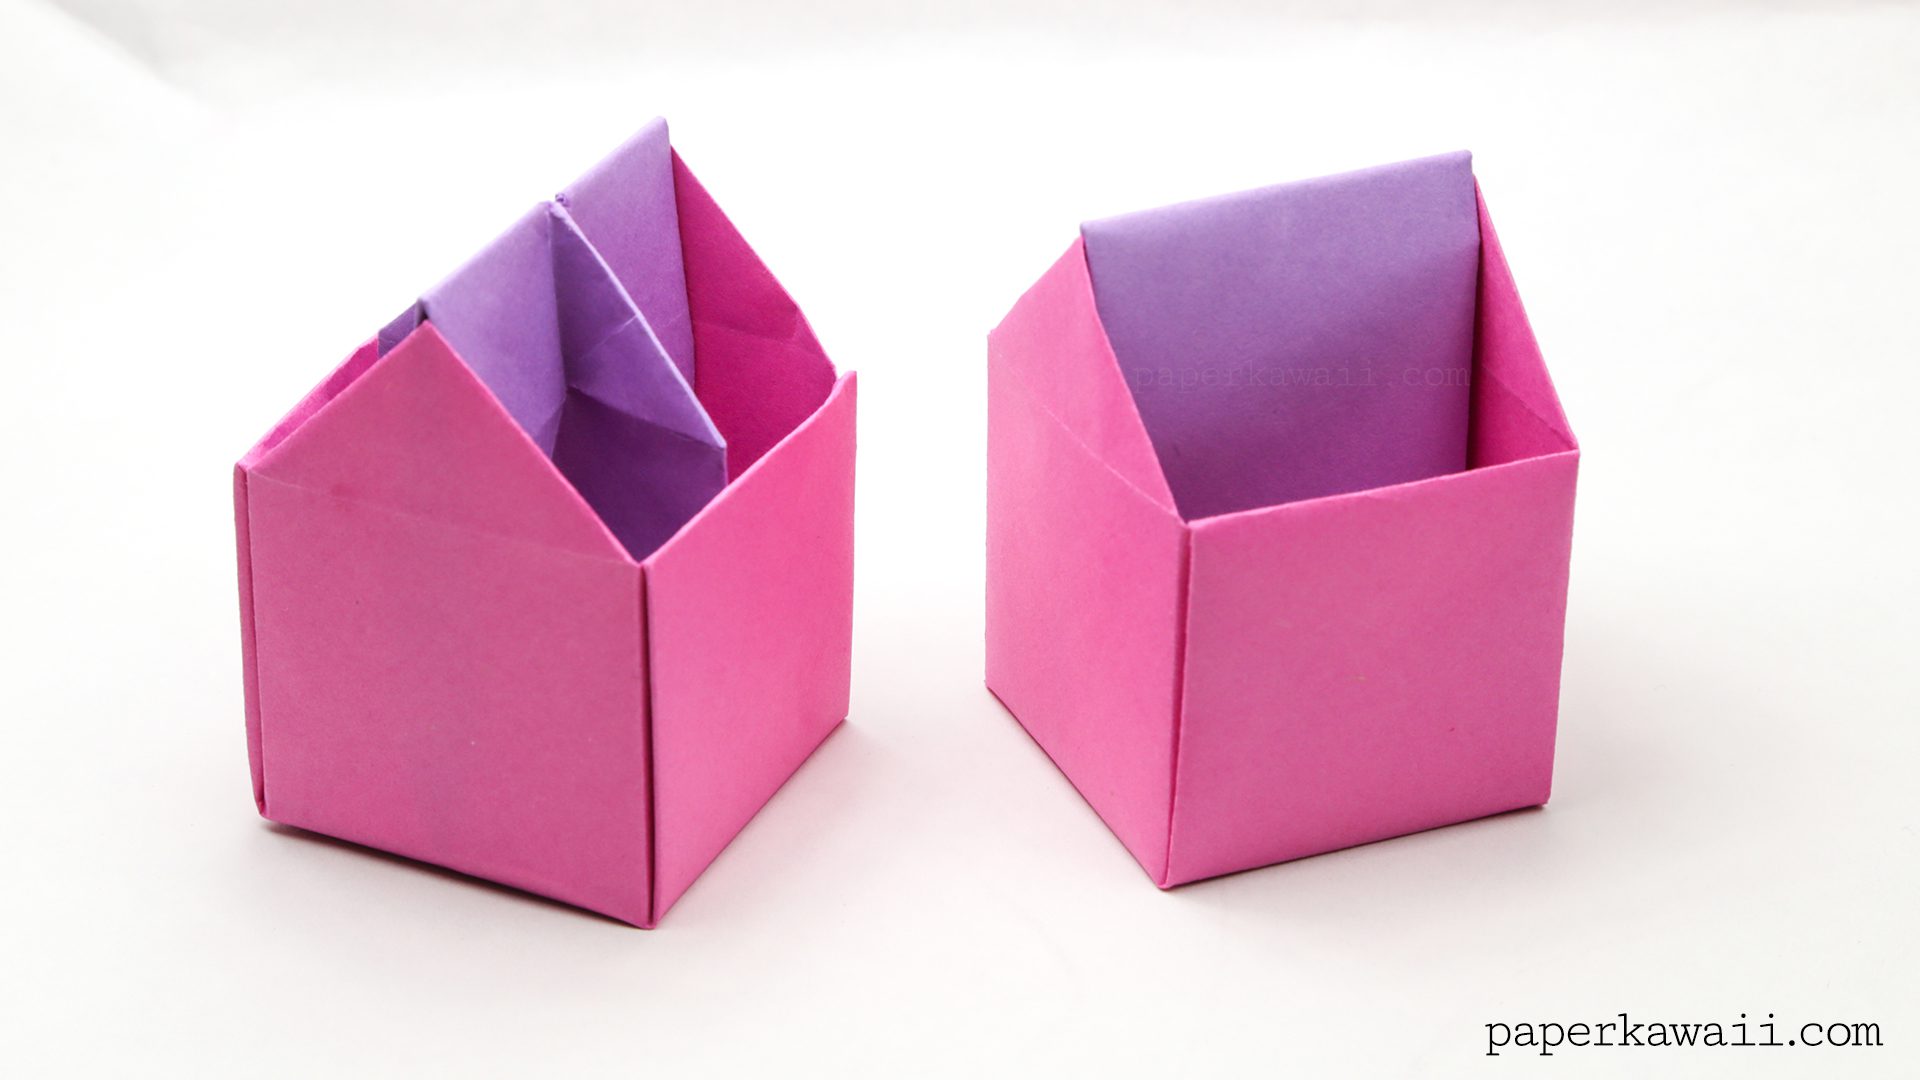 New Origami Box With Paper Origami